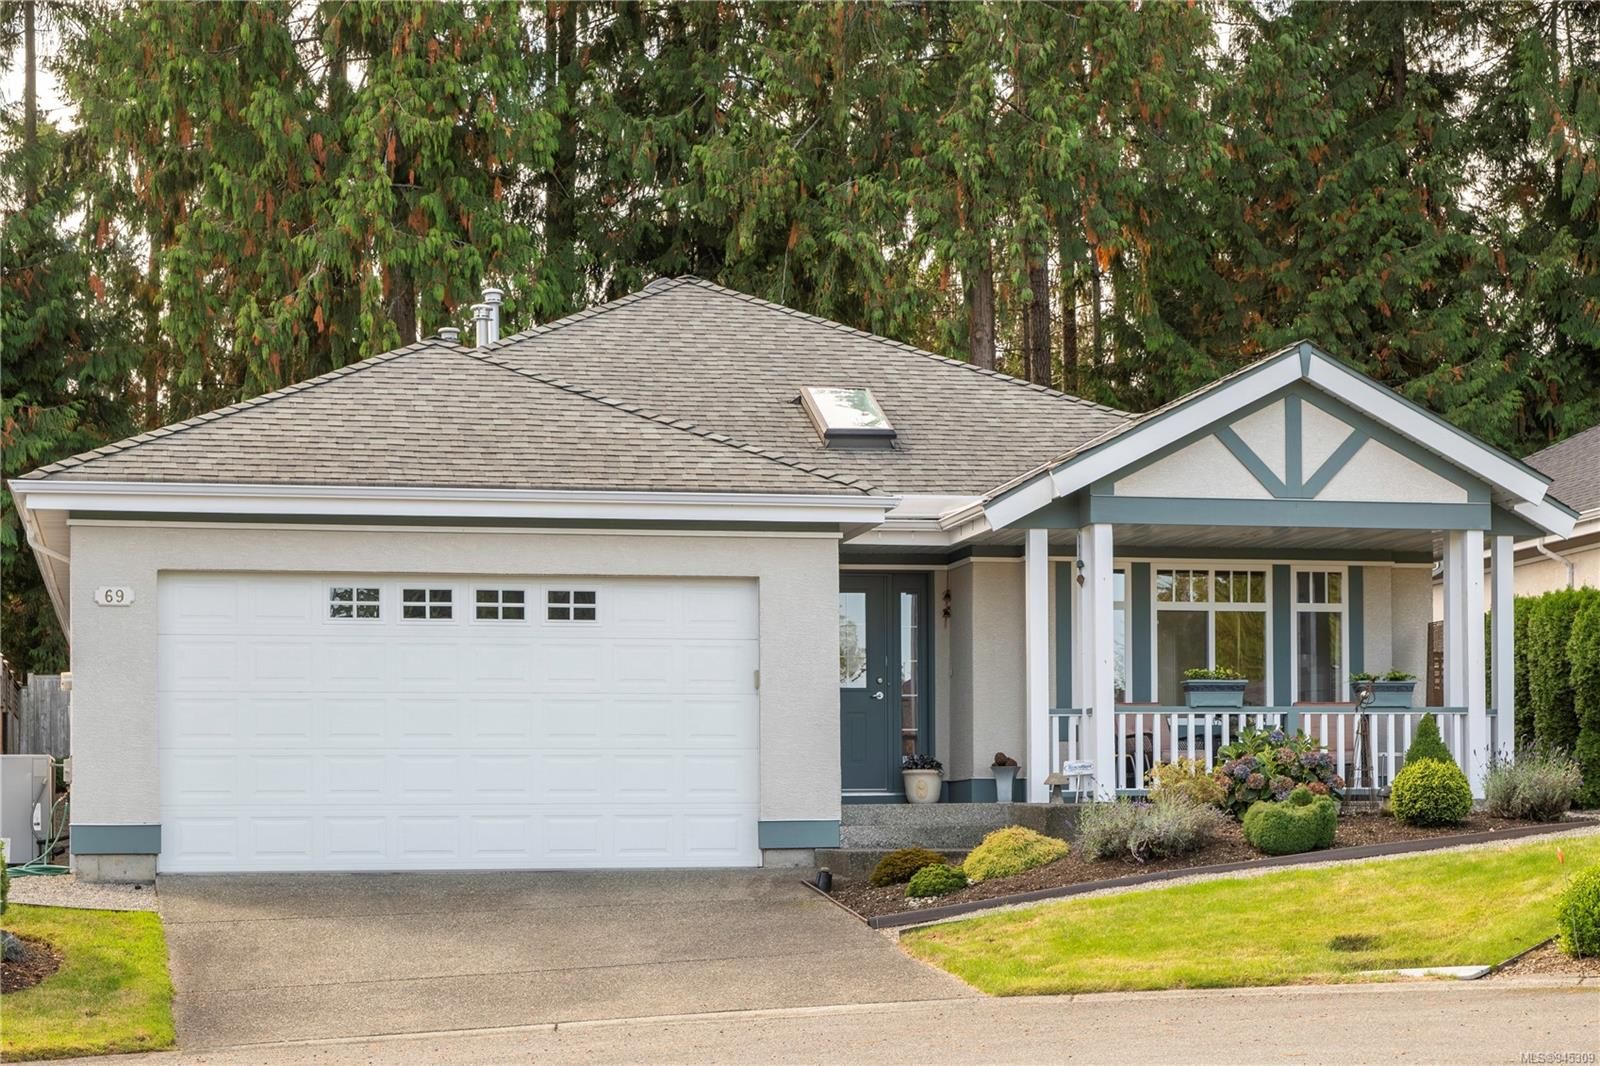 I have sold a property at 69 Bridgewater Lane in Parksville
